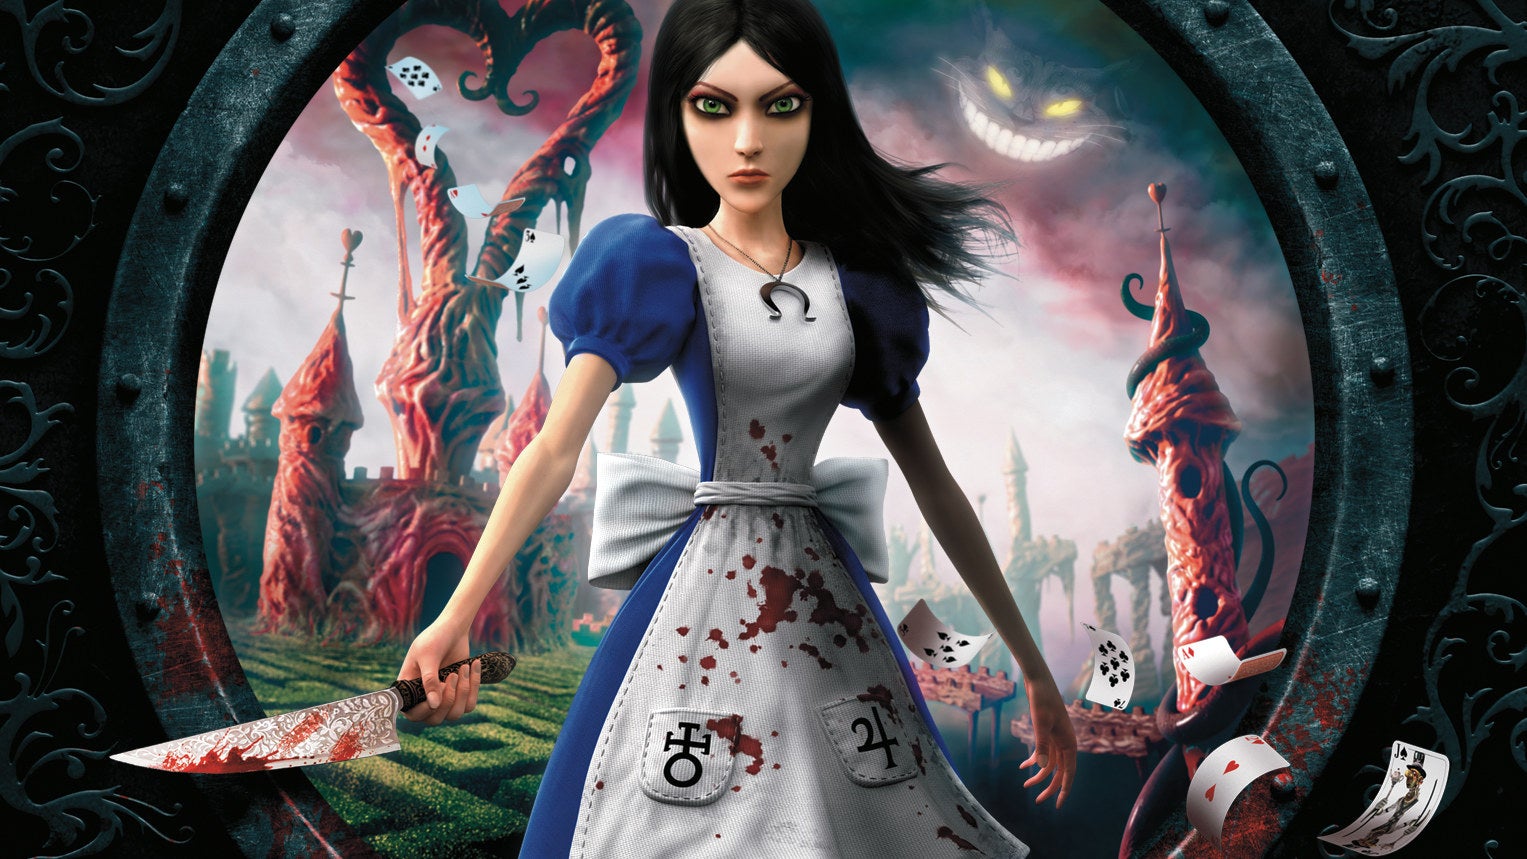 American McGee's Alice sequel pitch rejected by EA | Rock Paper